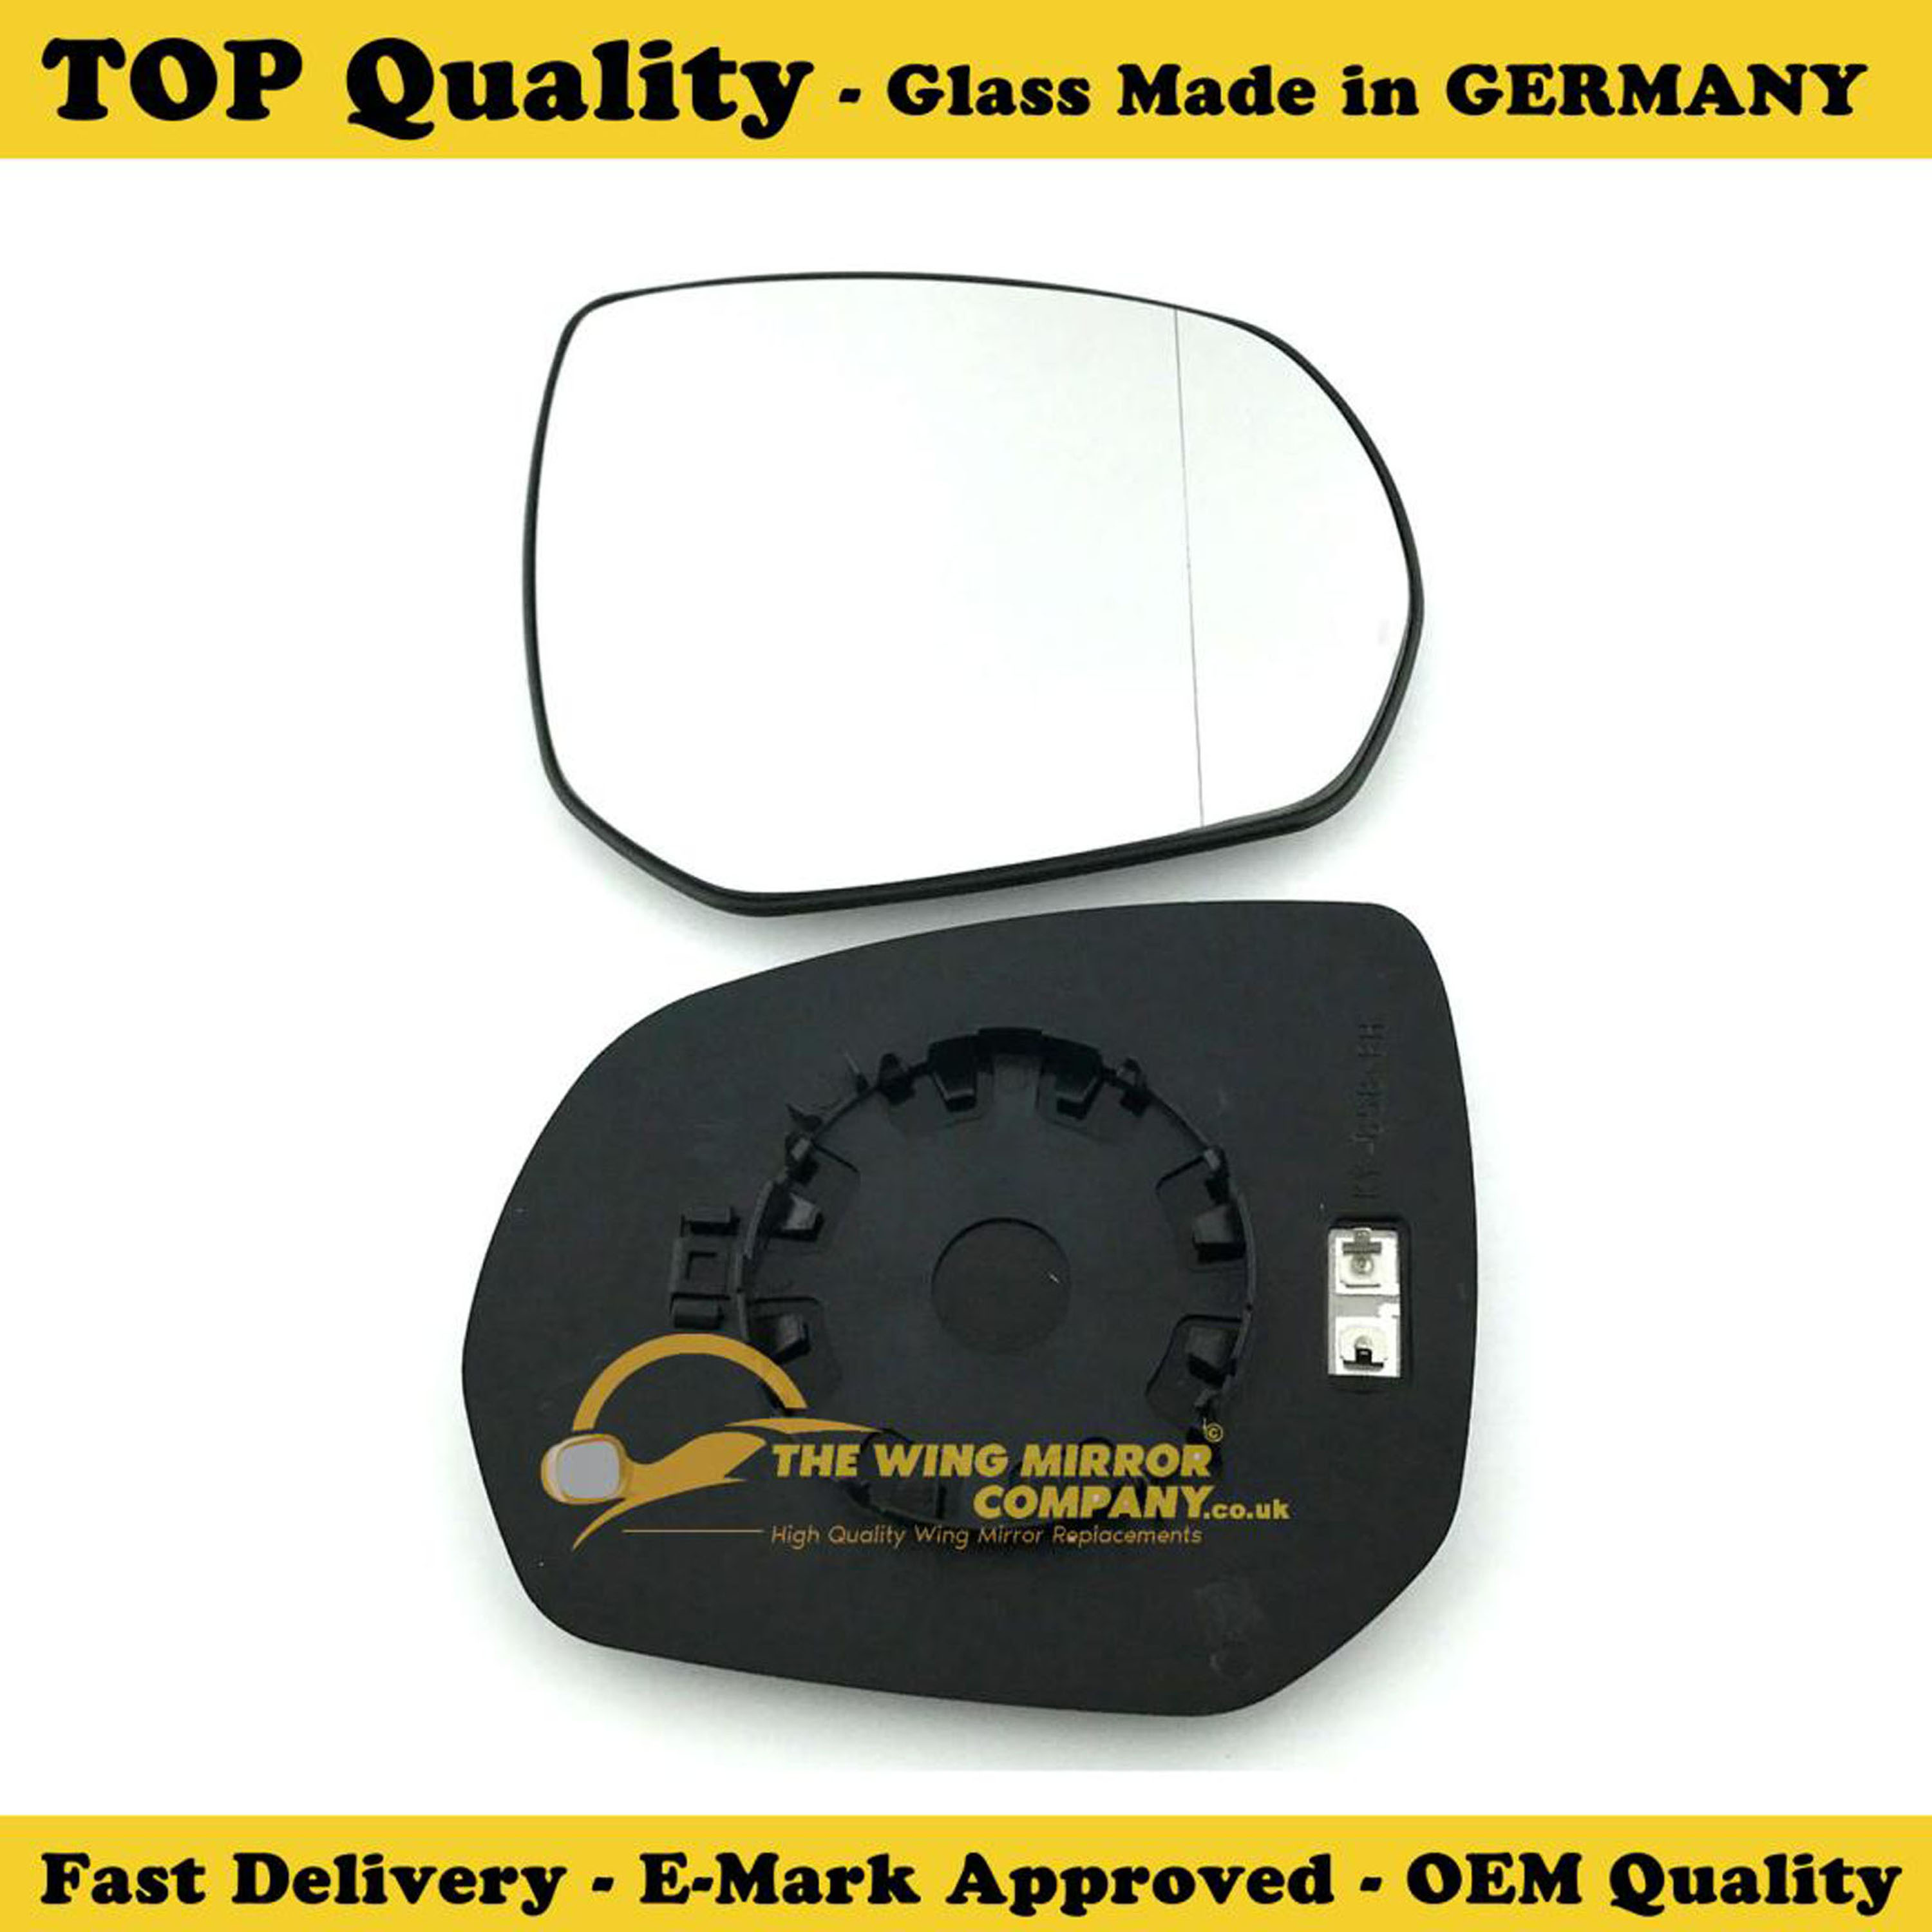 2006 to 2012 Righi Side Citroen C4 Picasso Wing Mirror Replacement Glass